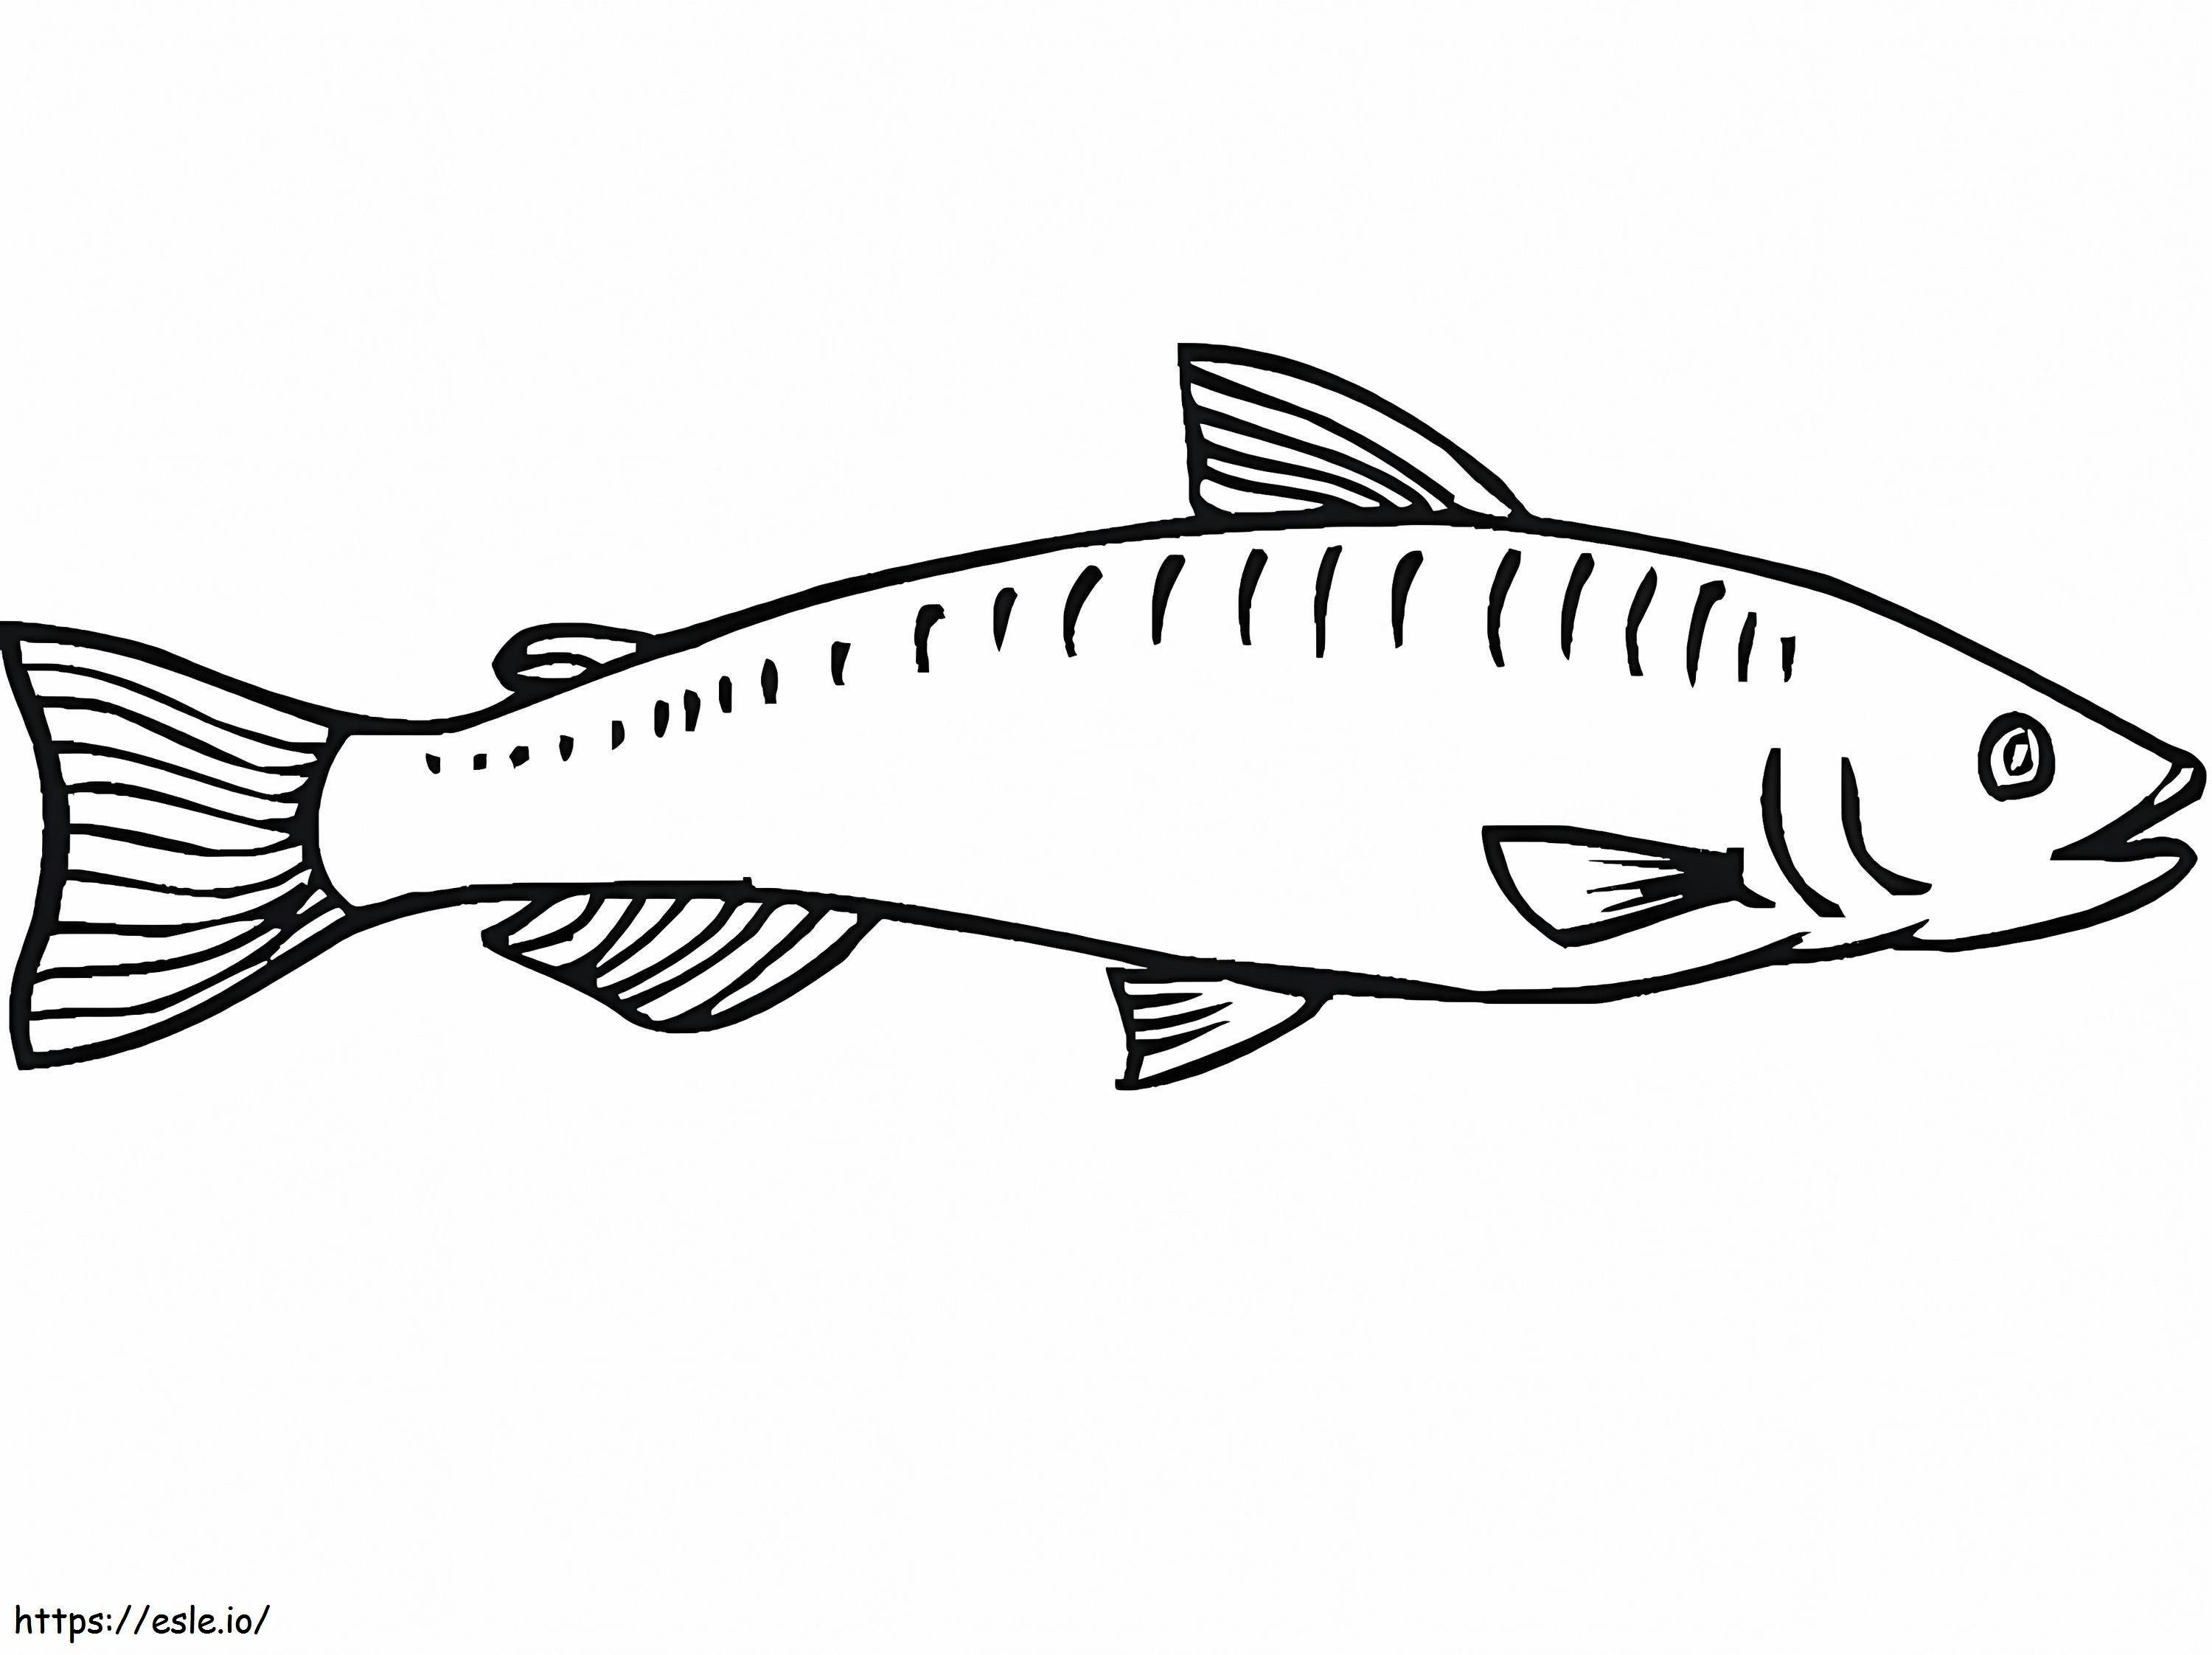 One Salmon coloring page